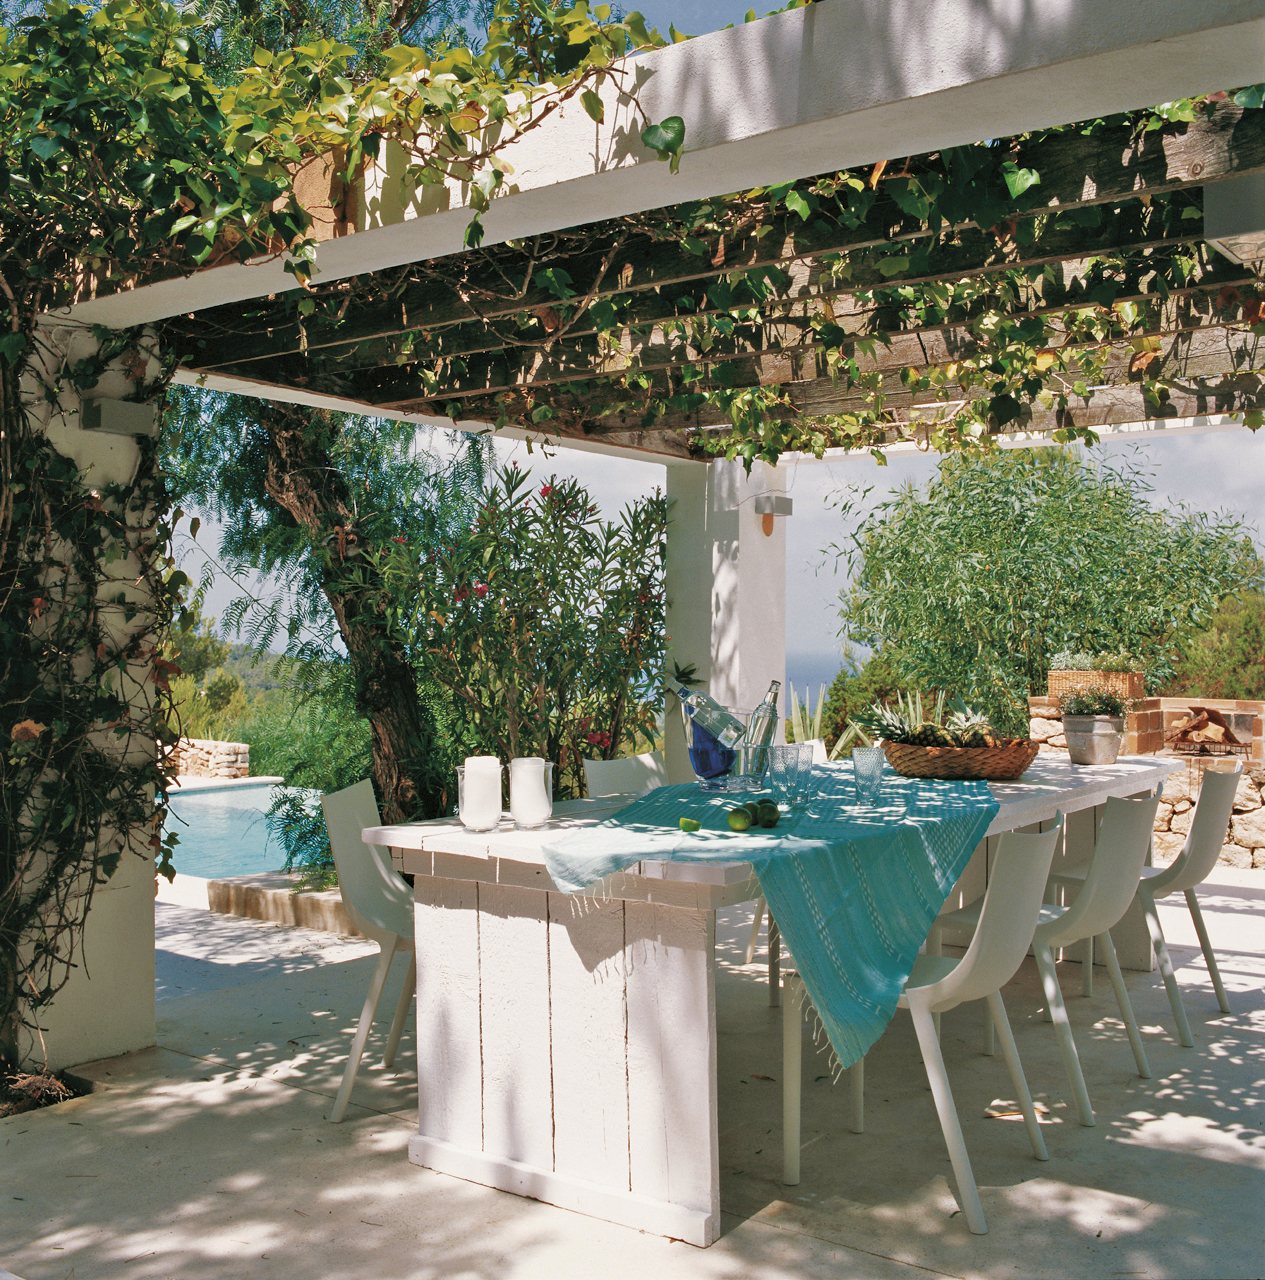 Mom's Turf: White Mediterranean Home in Ibiza with Pool and Amazing Vi...